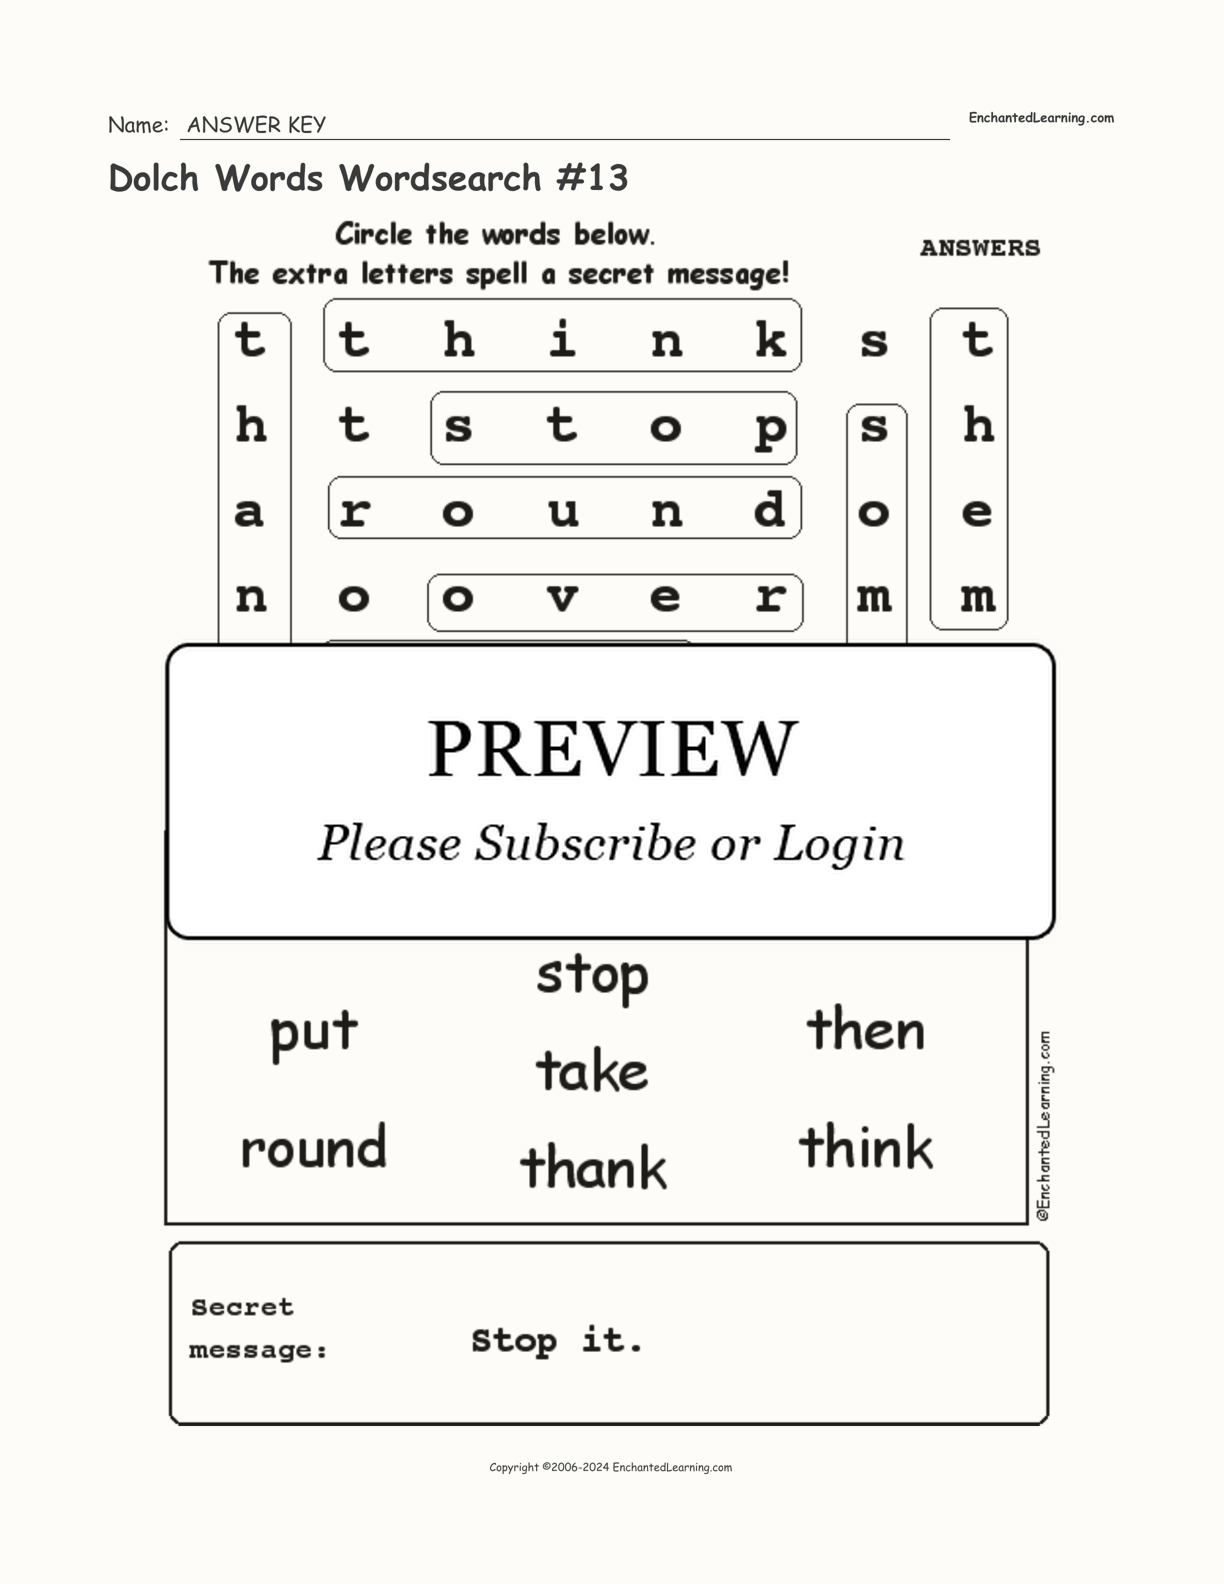 Dolch Words Wordsearch #13 interactive worksheet page 2